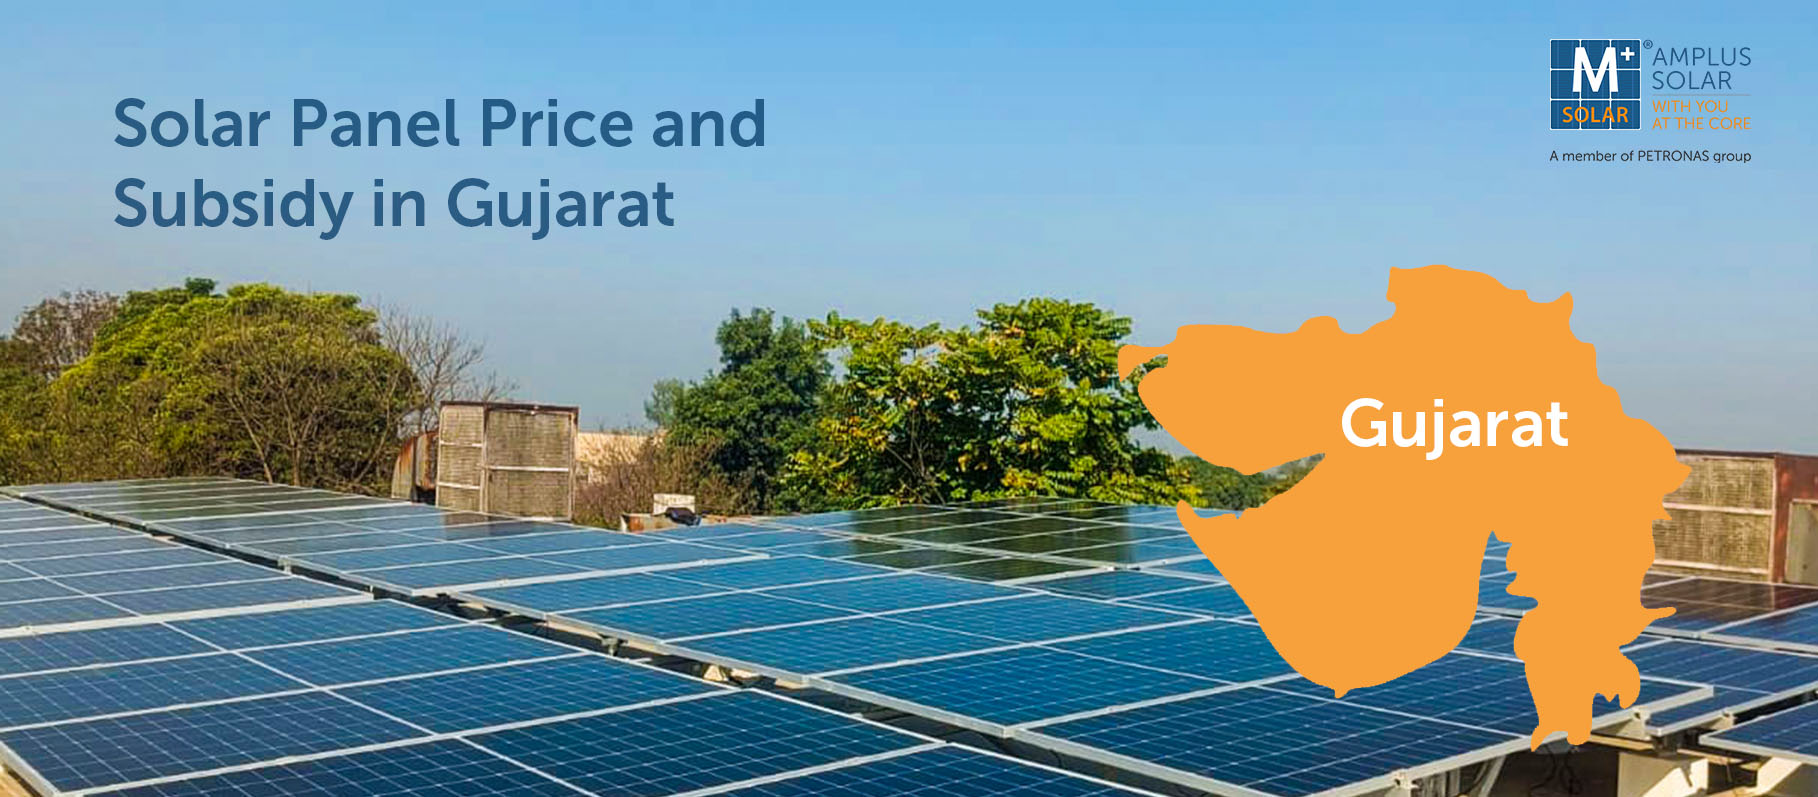 Solar Panel Price and Subsidy in Gujarat